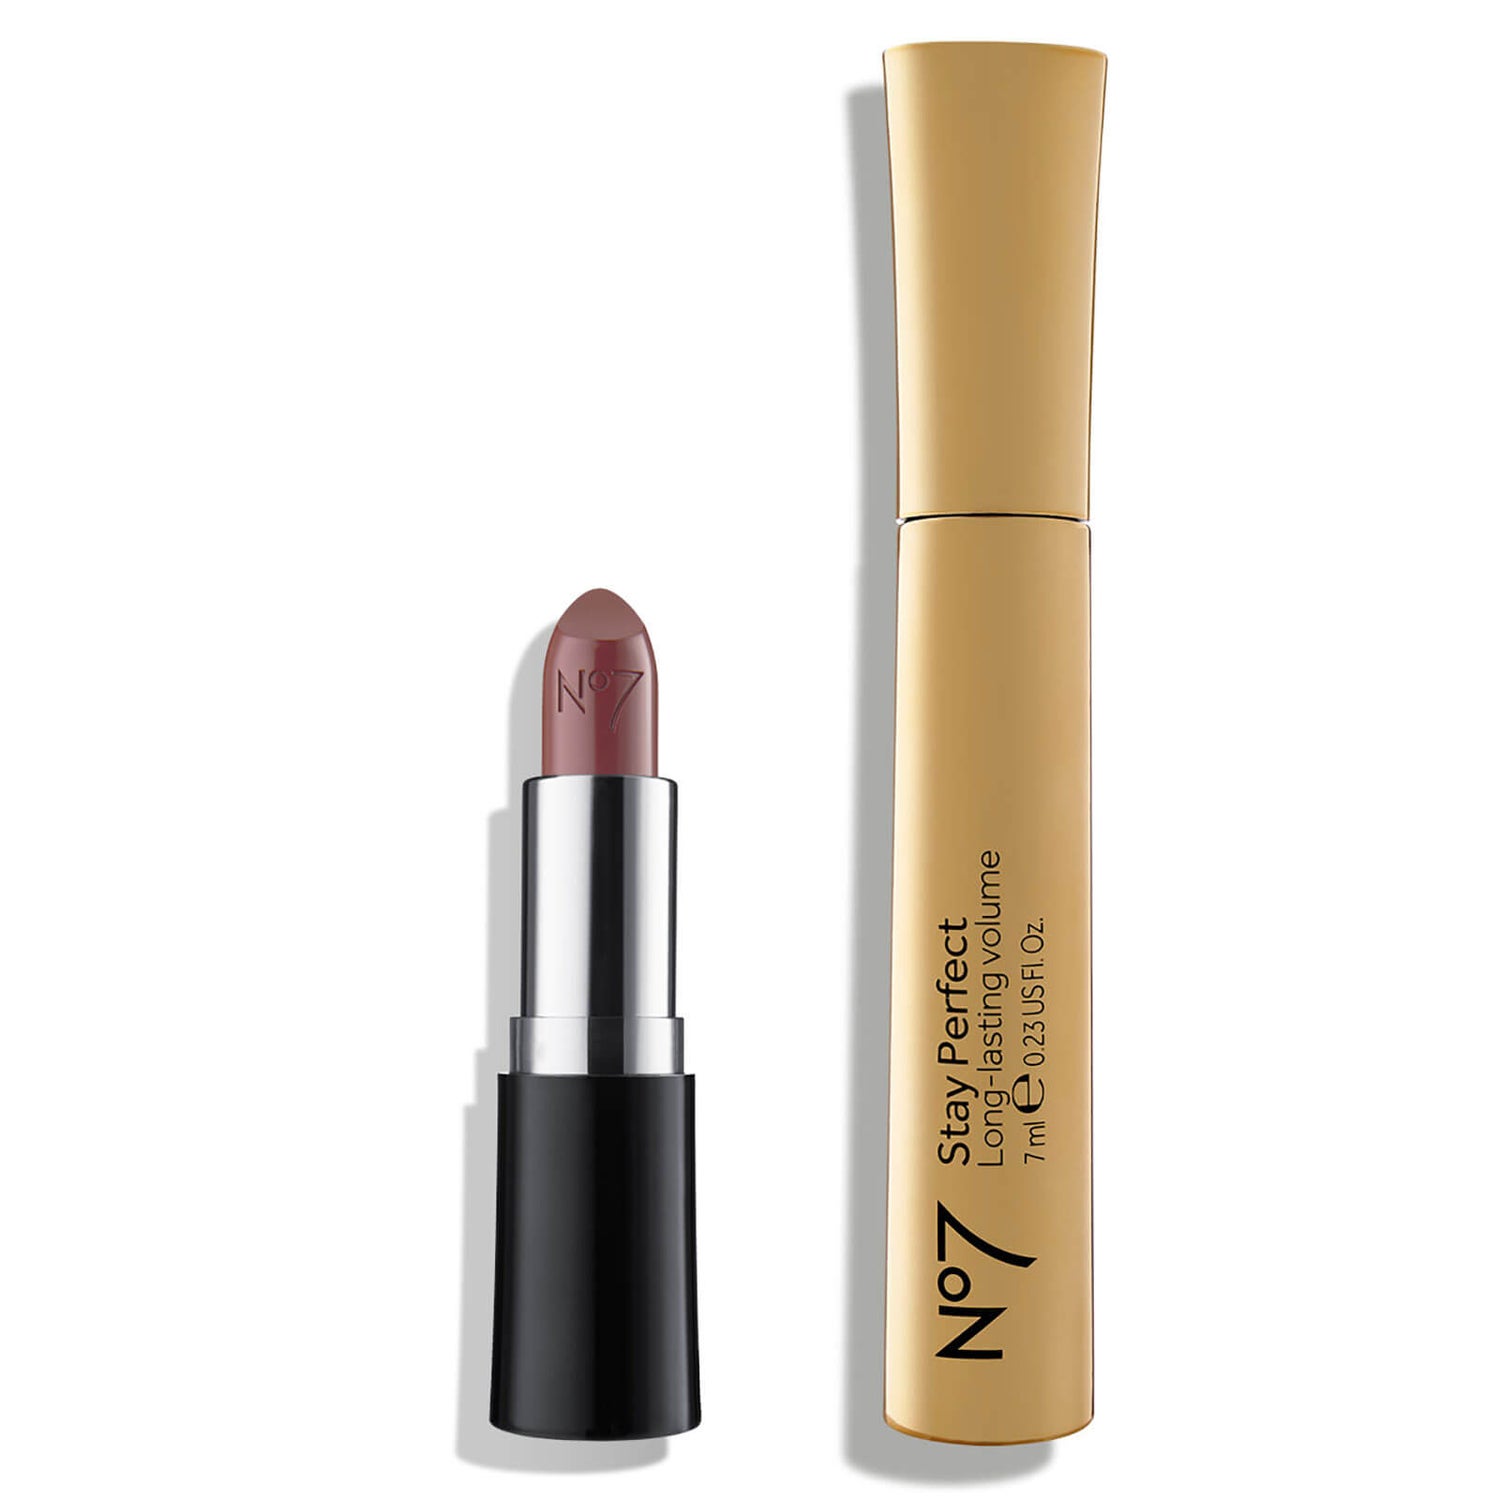 Nutmeg Spice Moisture Drench Lipstick and Stay Perfect Mascara Duo ($21.98 Value)